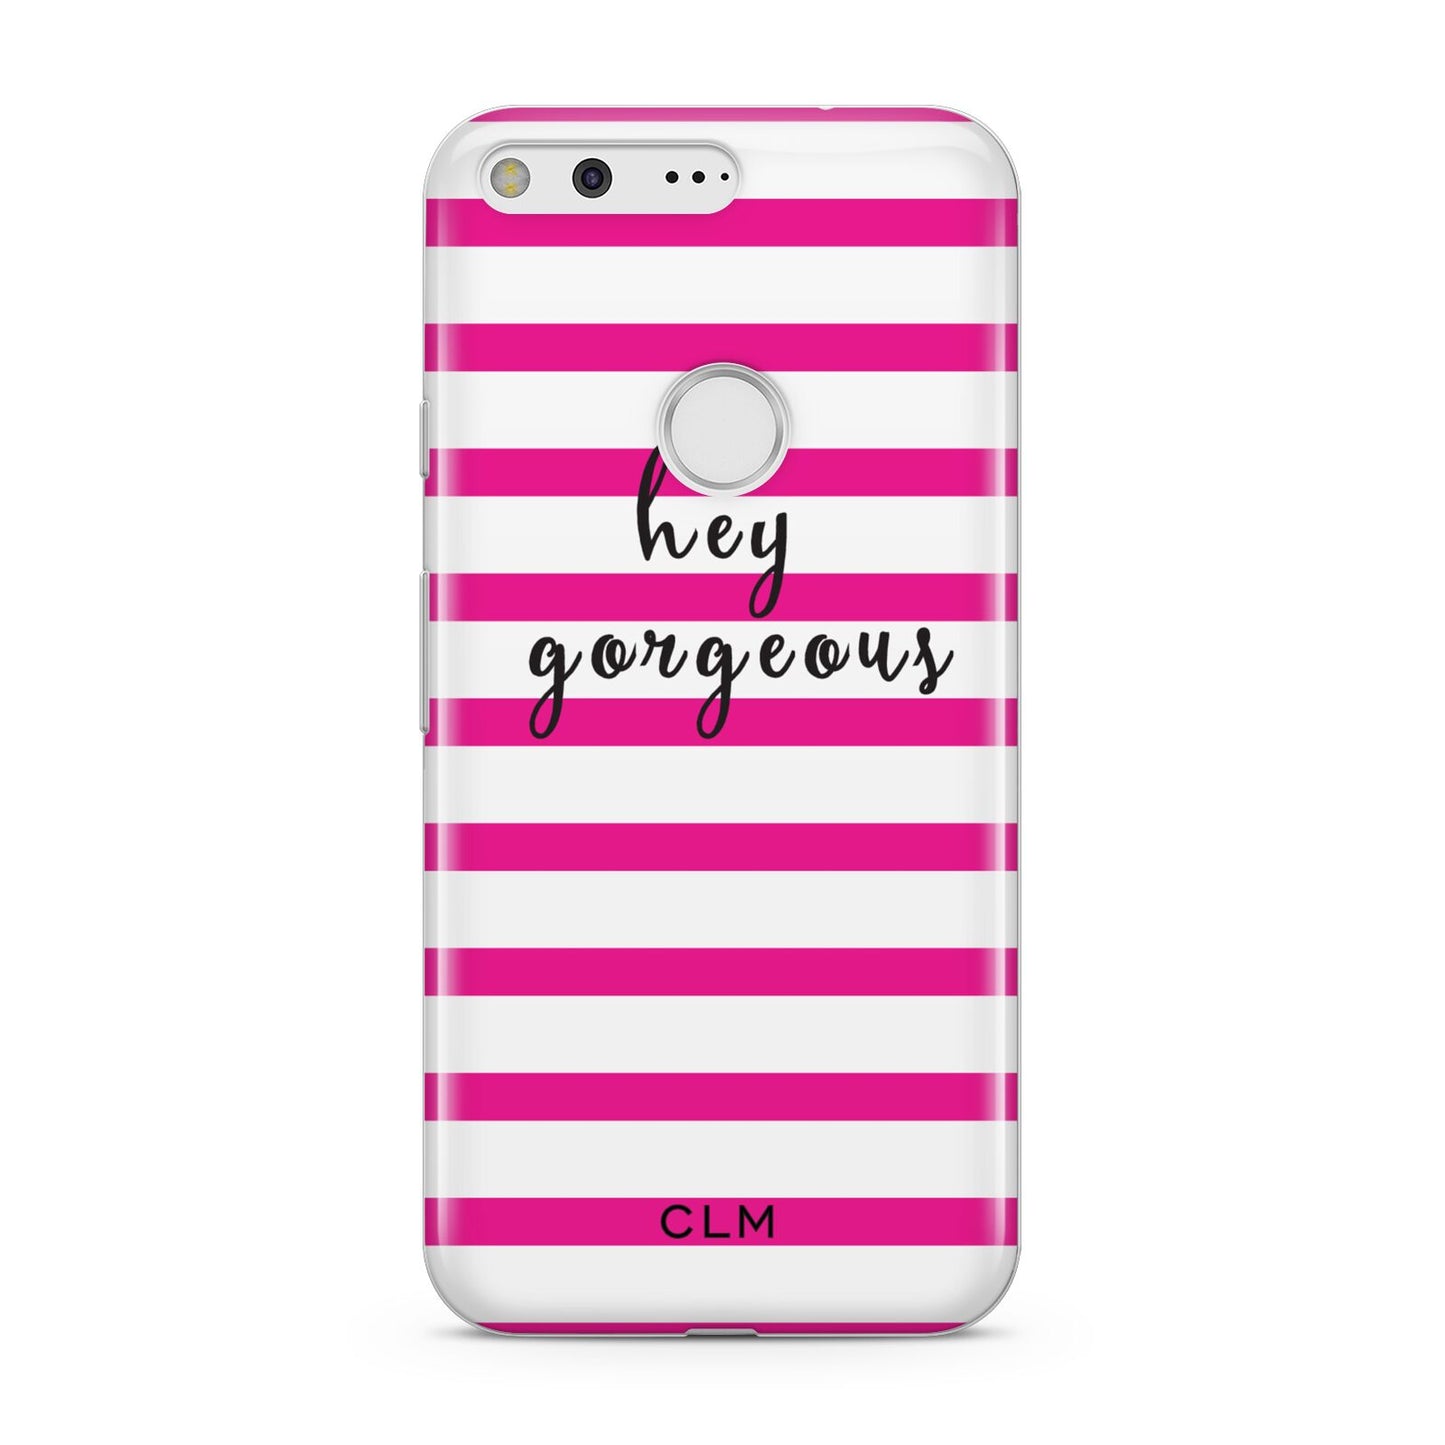 Personalised Initials Pink Striped Google Pixel Case